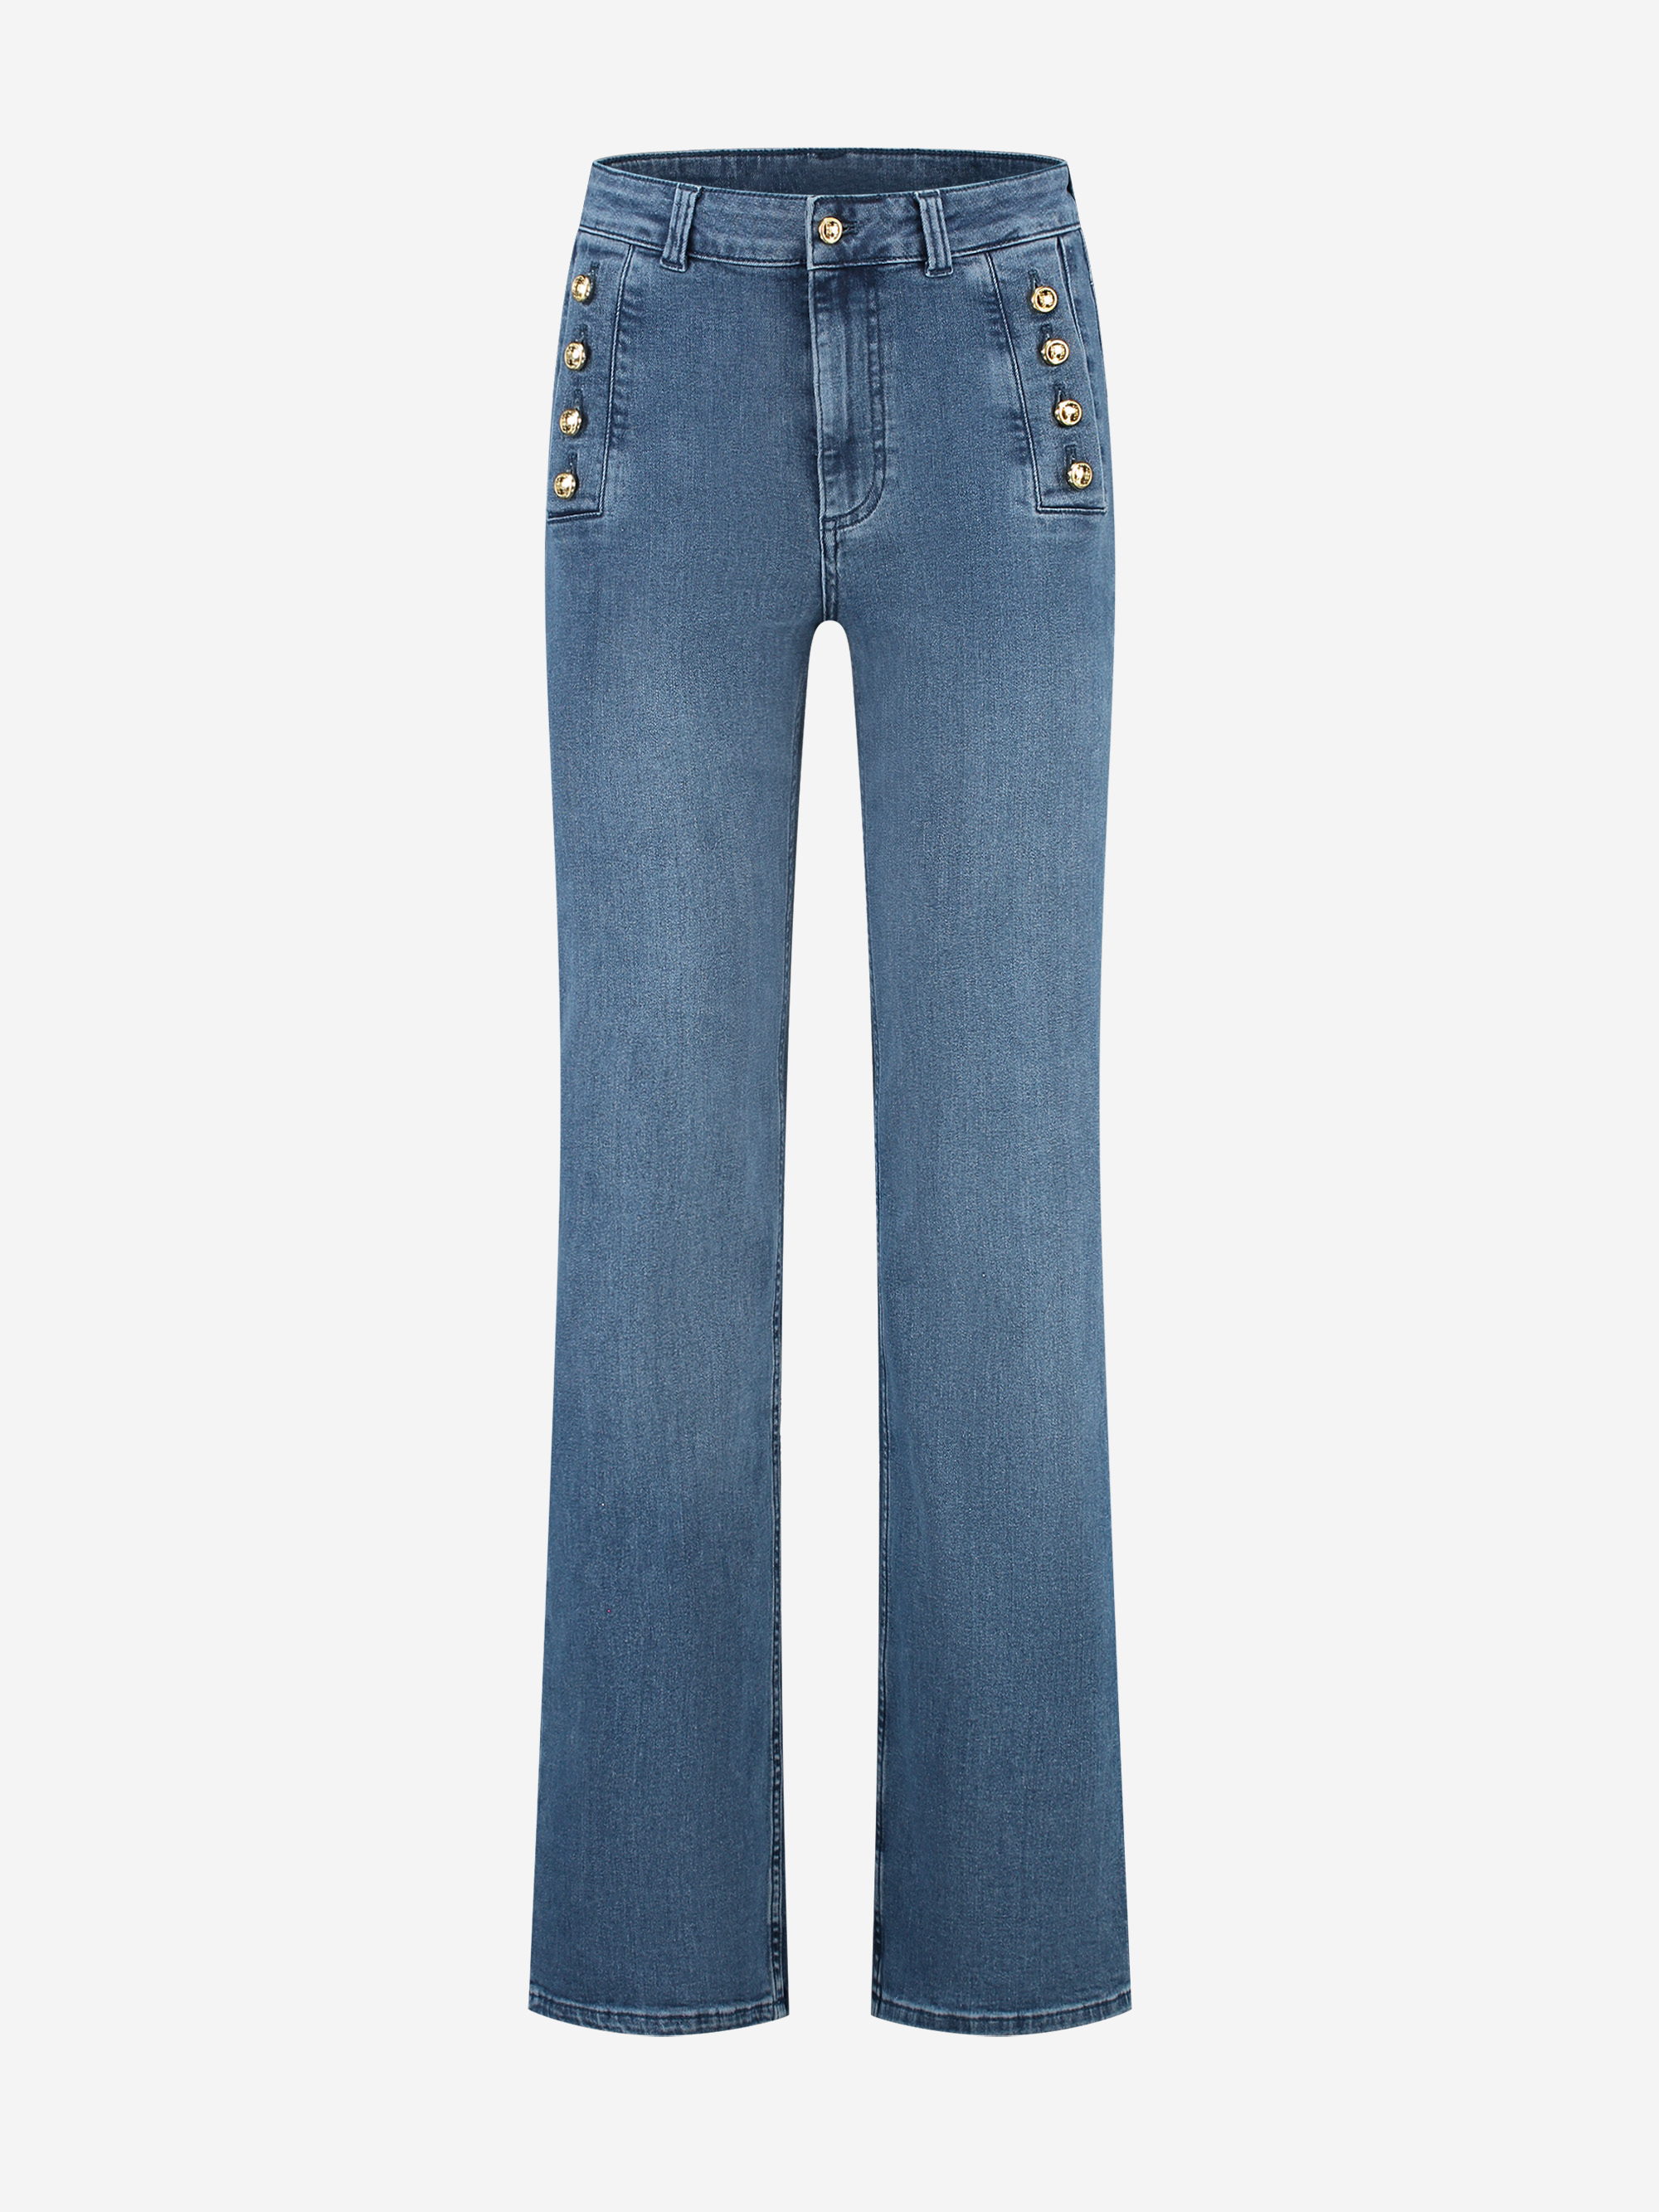 Brooklyn Button Jeans